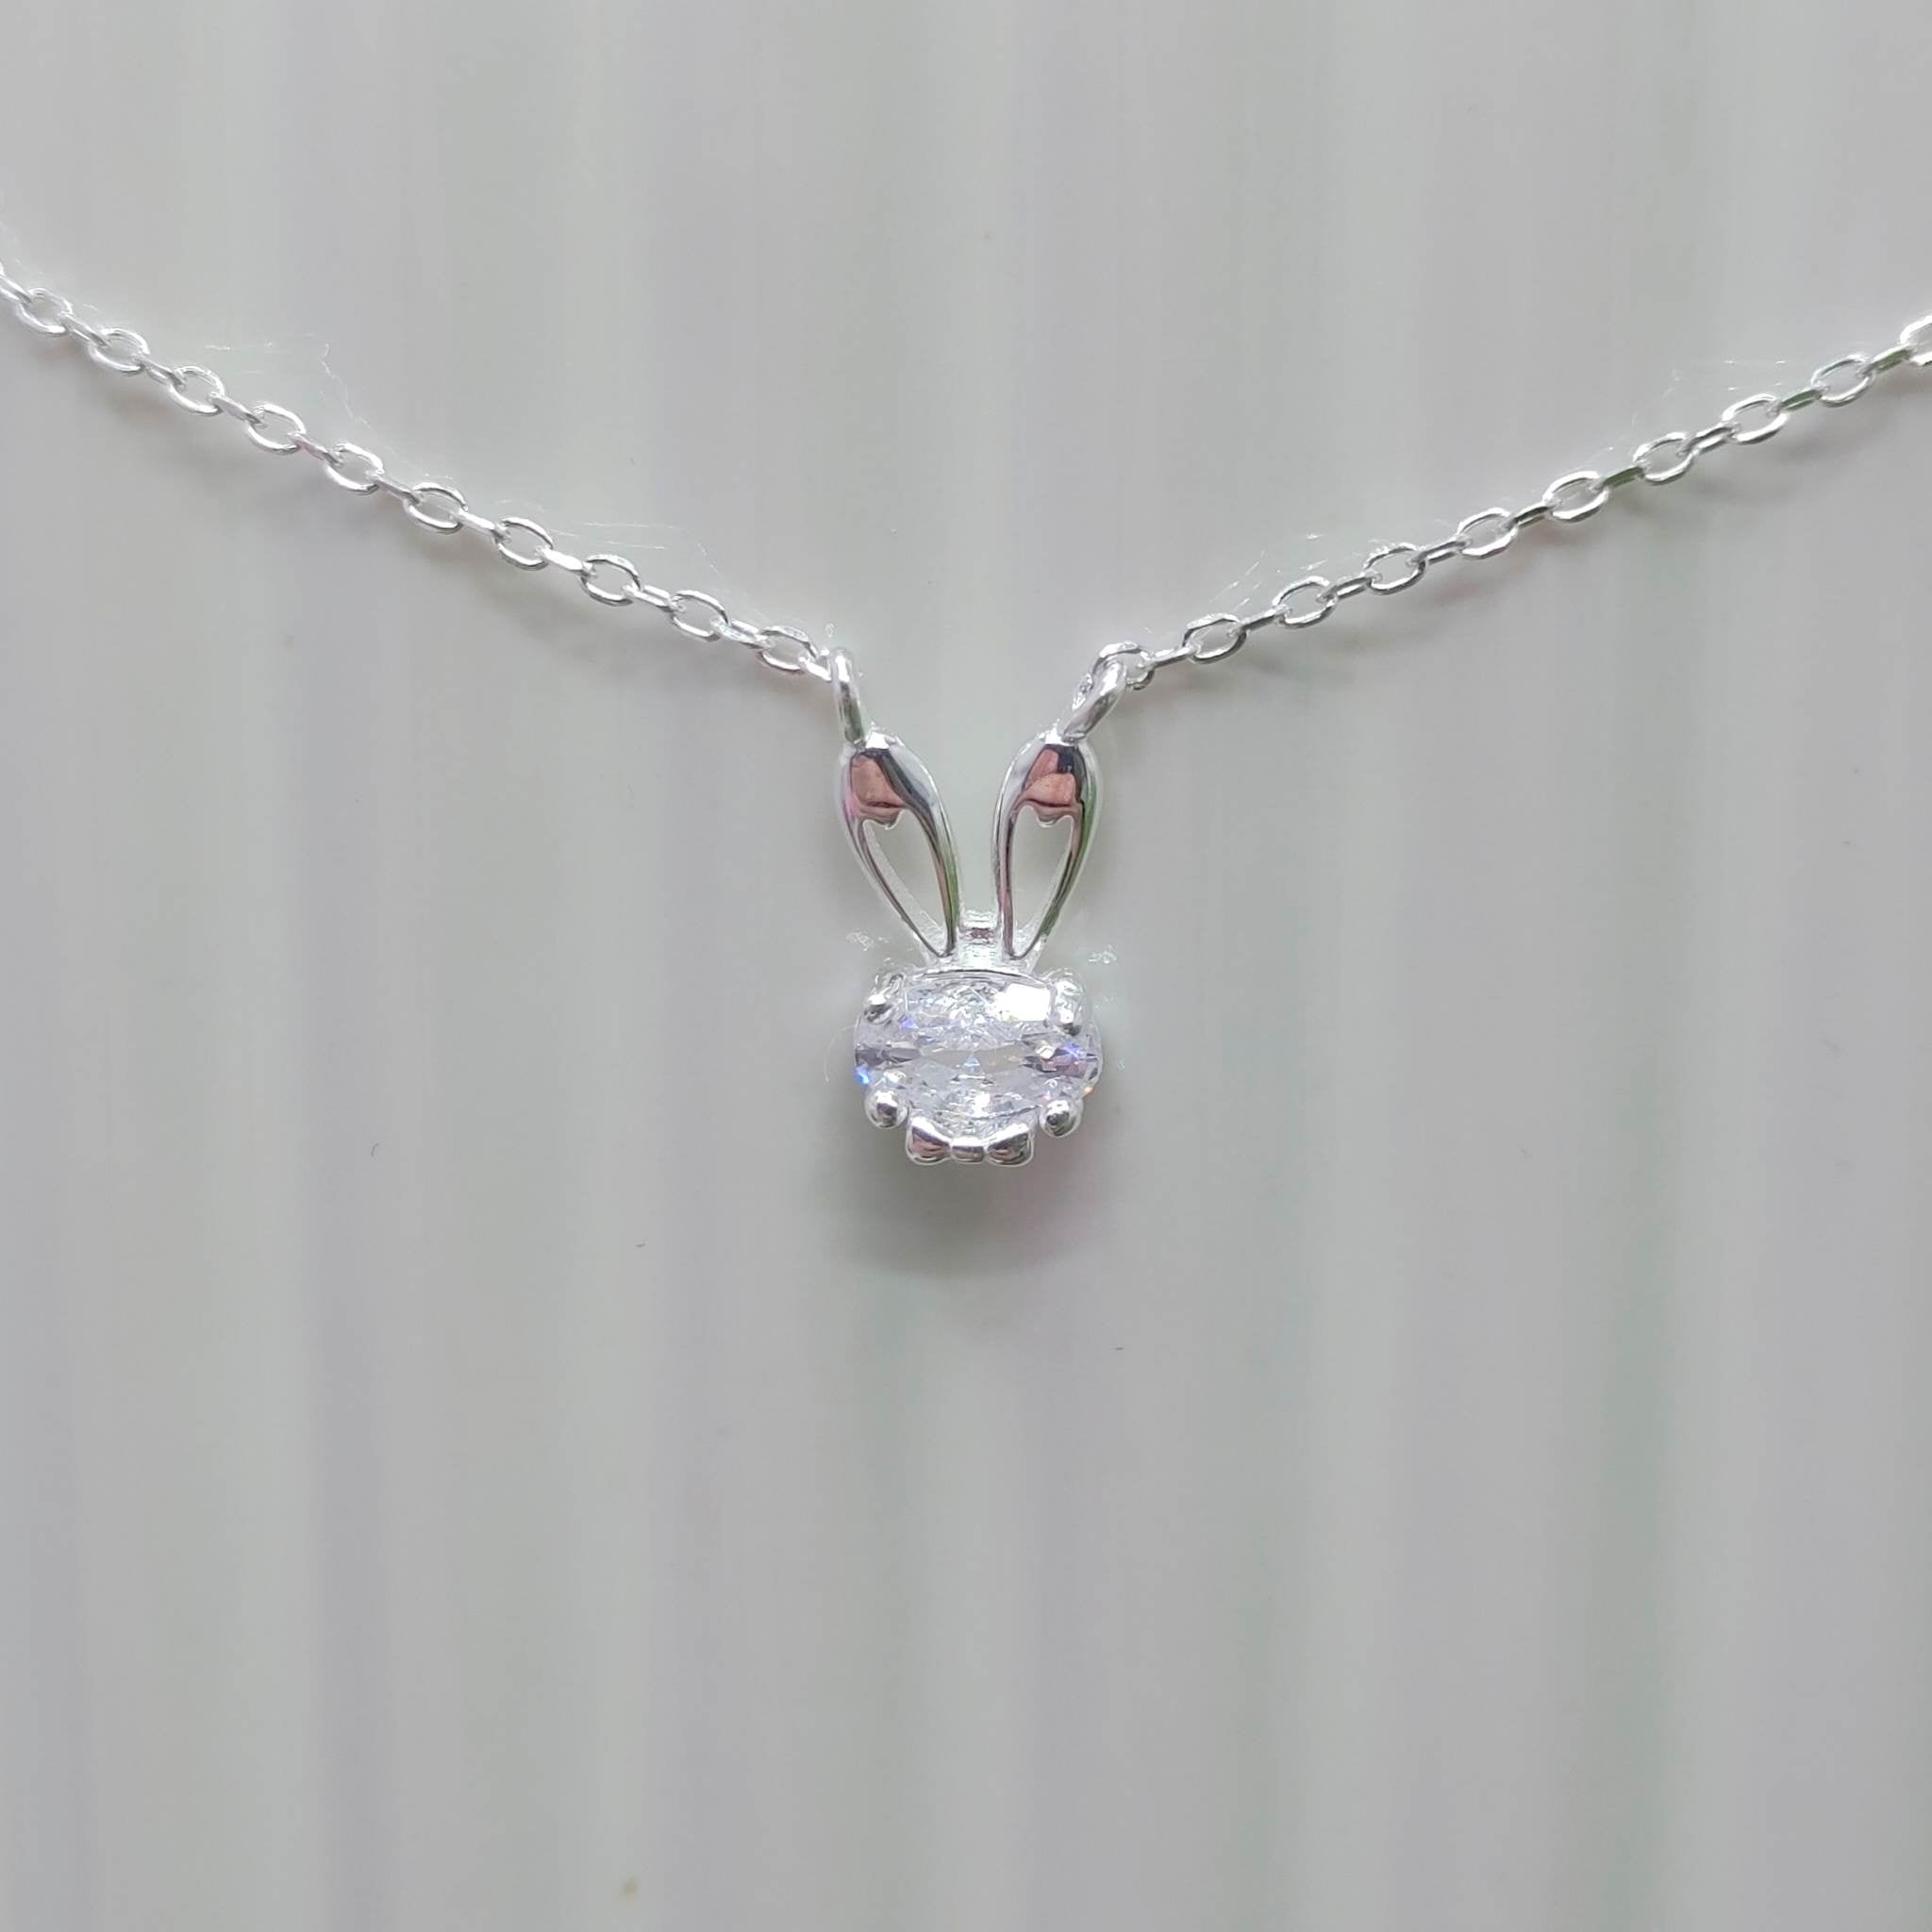 'Small rabit' necklace 